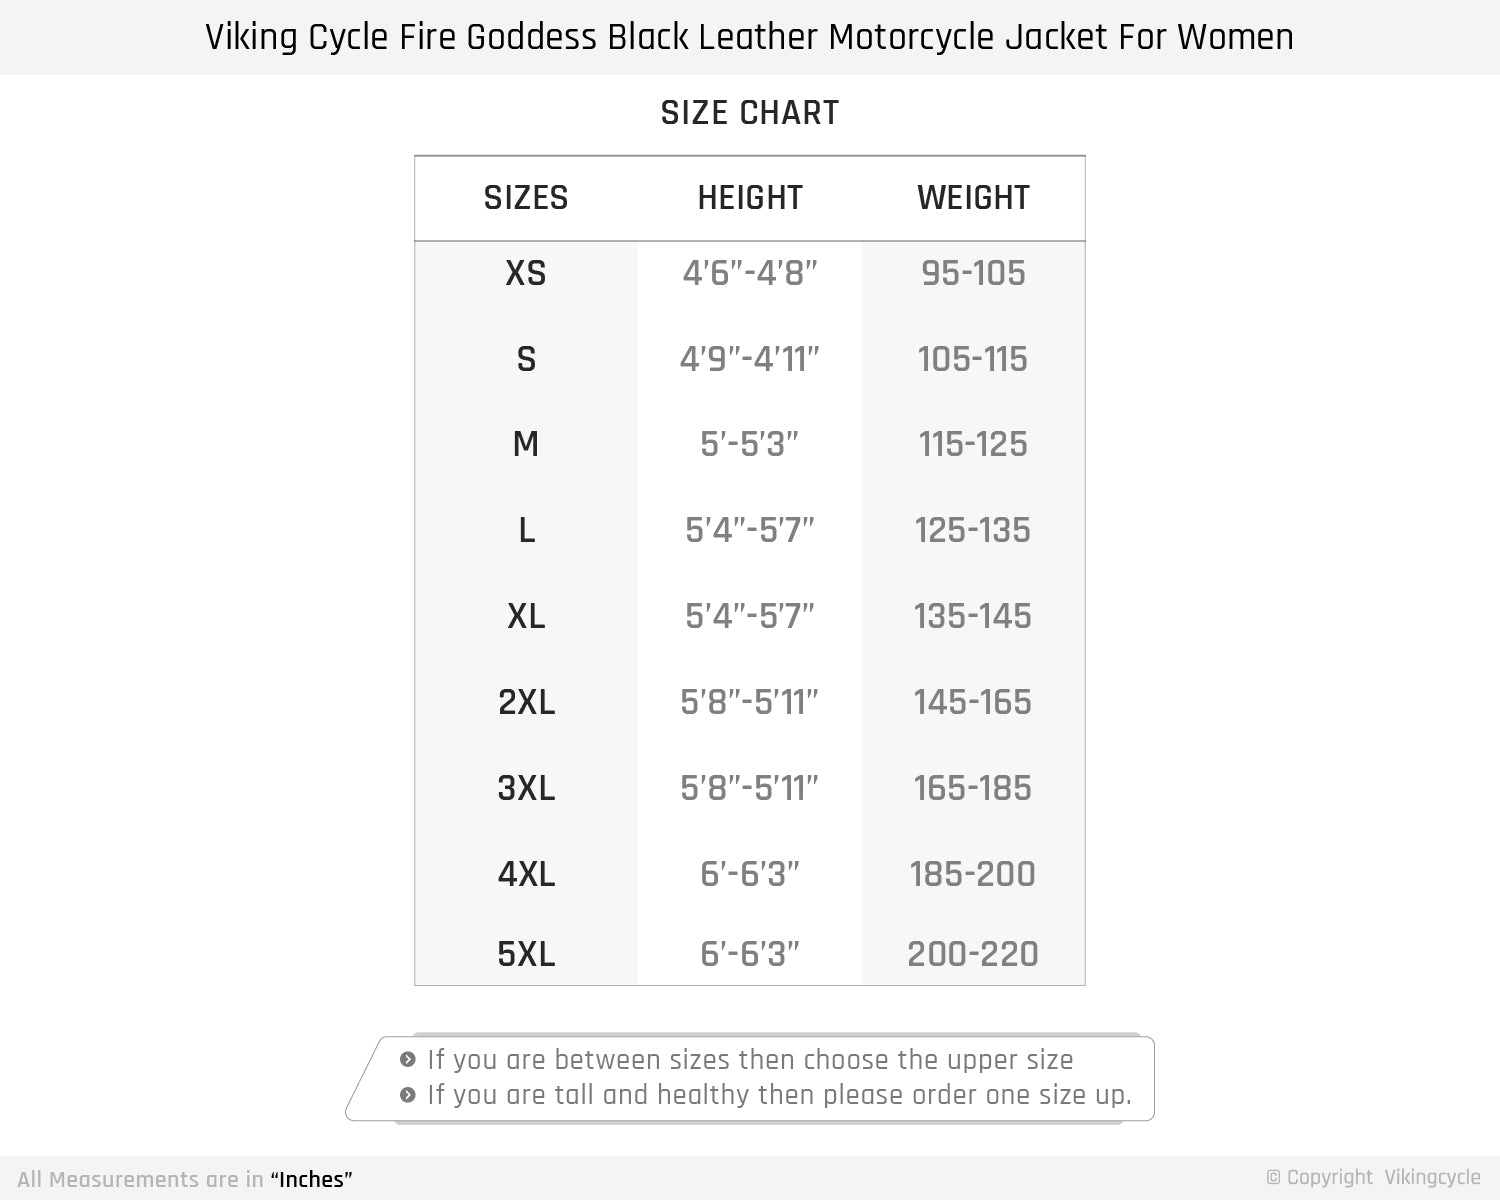 Viking Cycle Fire Goddess Black Leather Motorcycle Jacket for Women